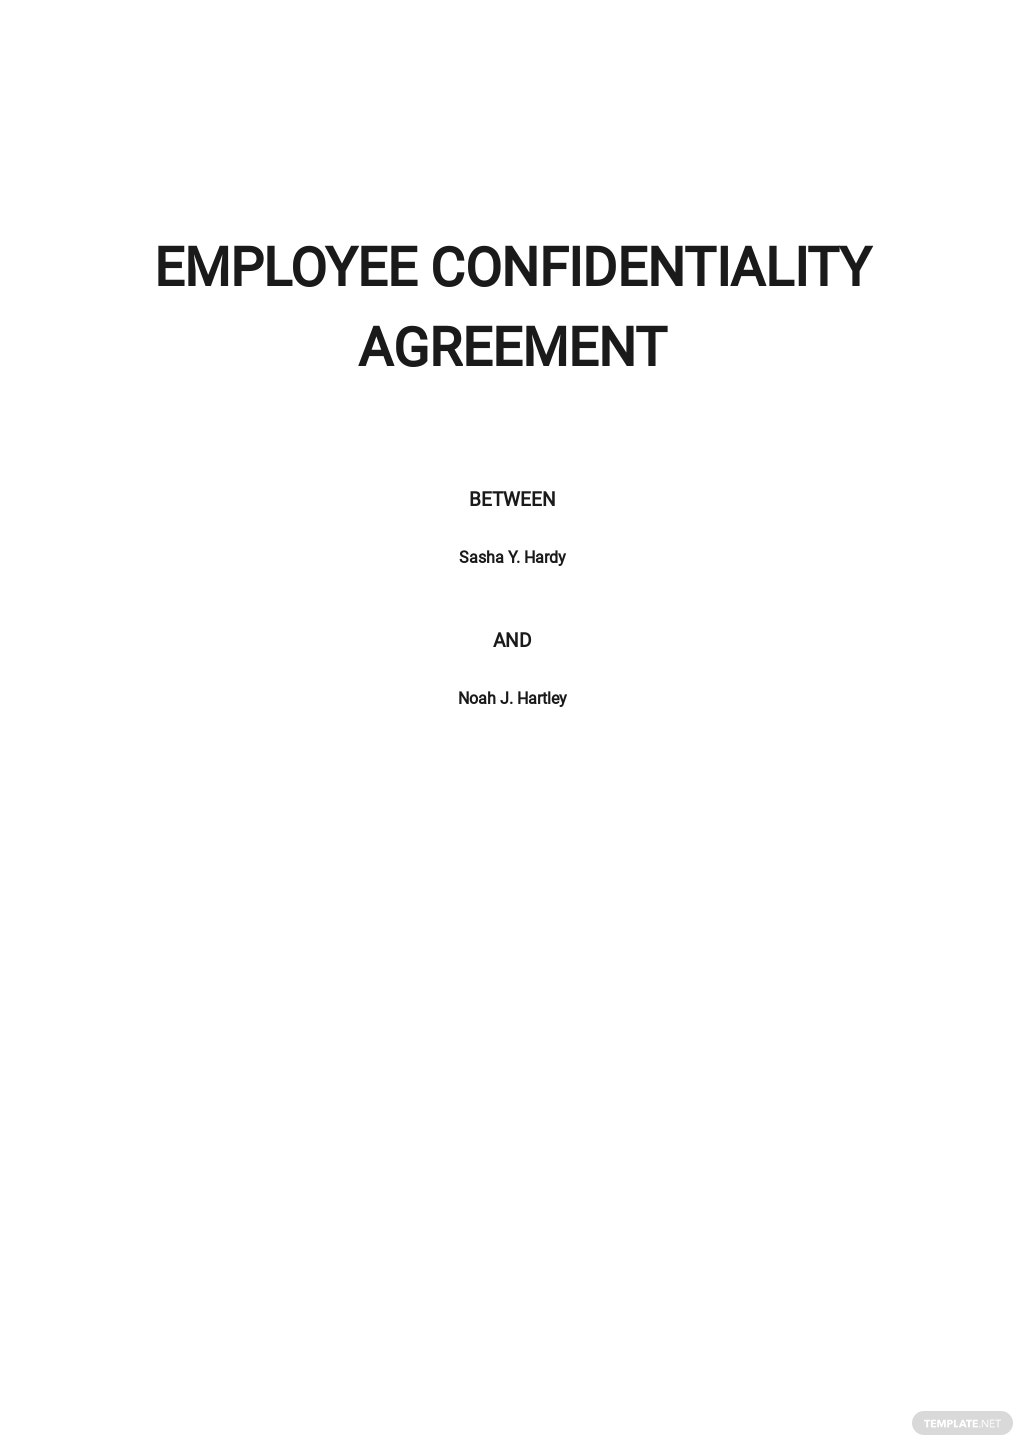 sample employee confidentiality agreement template